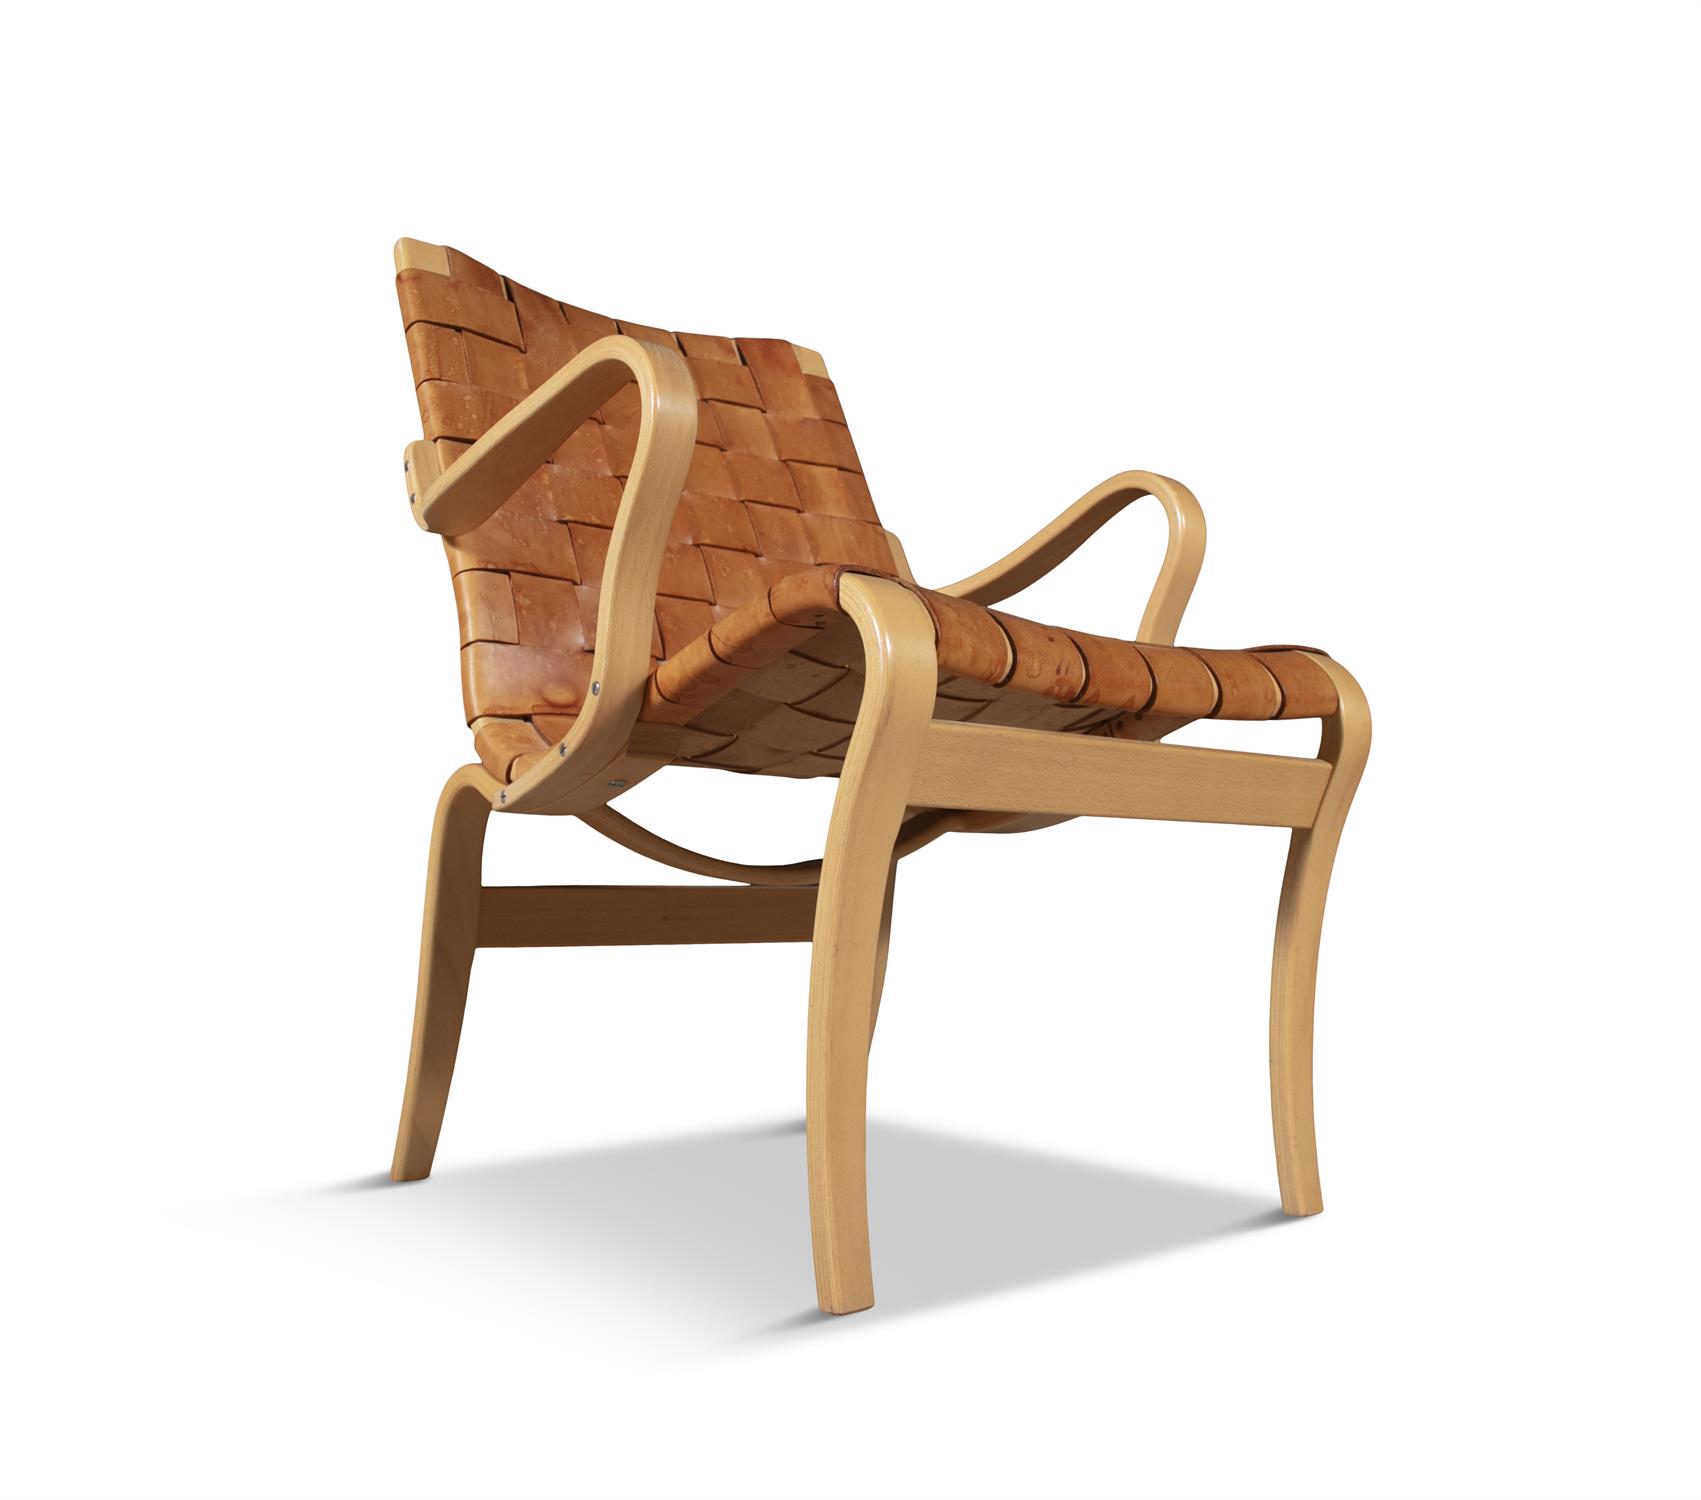 BRUNO MATHSSON Eva armchair by Bruno Mathsson in beech and leather. c.1970. 60 x 65 x 80cm(h); - Image 4 of 5